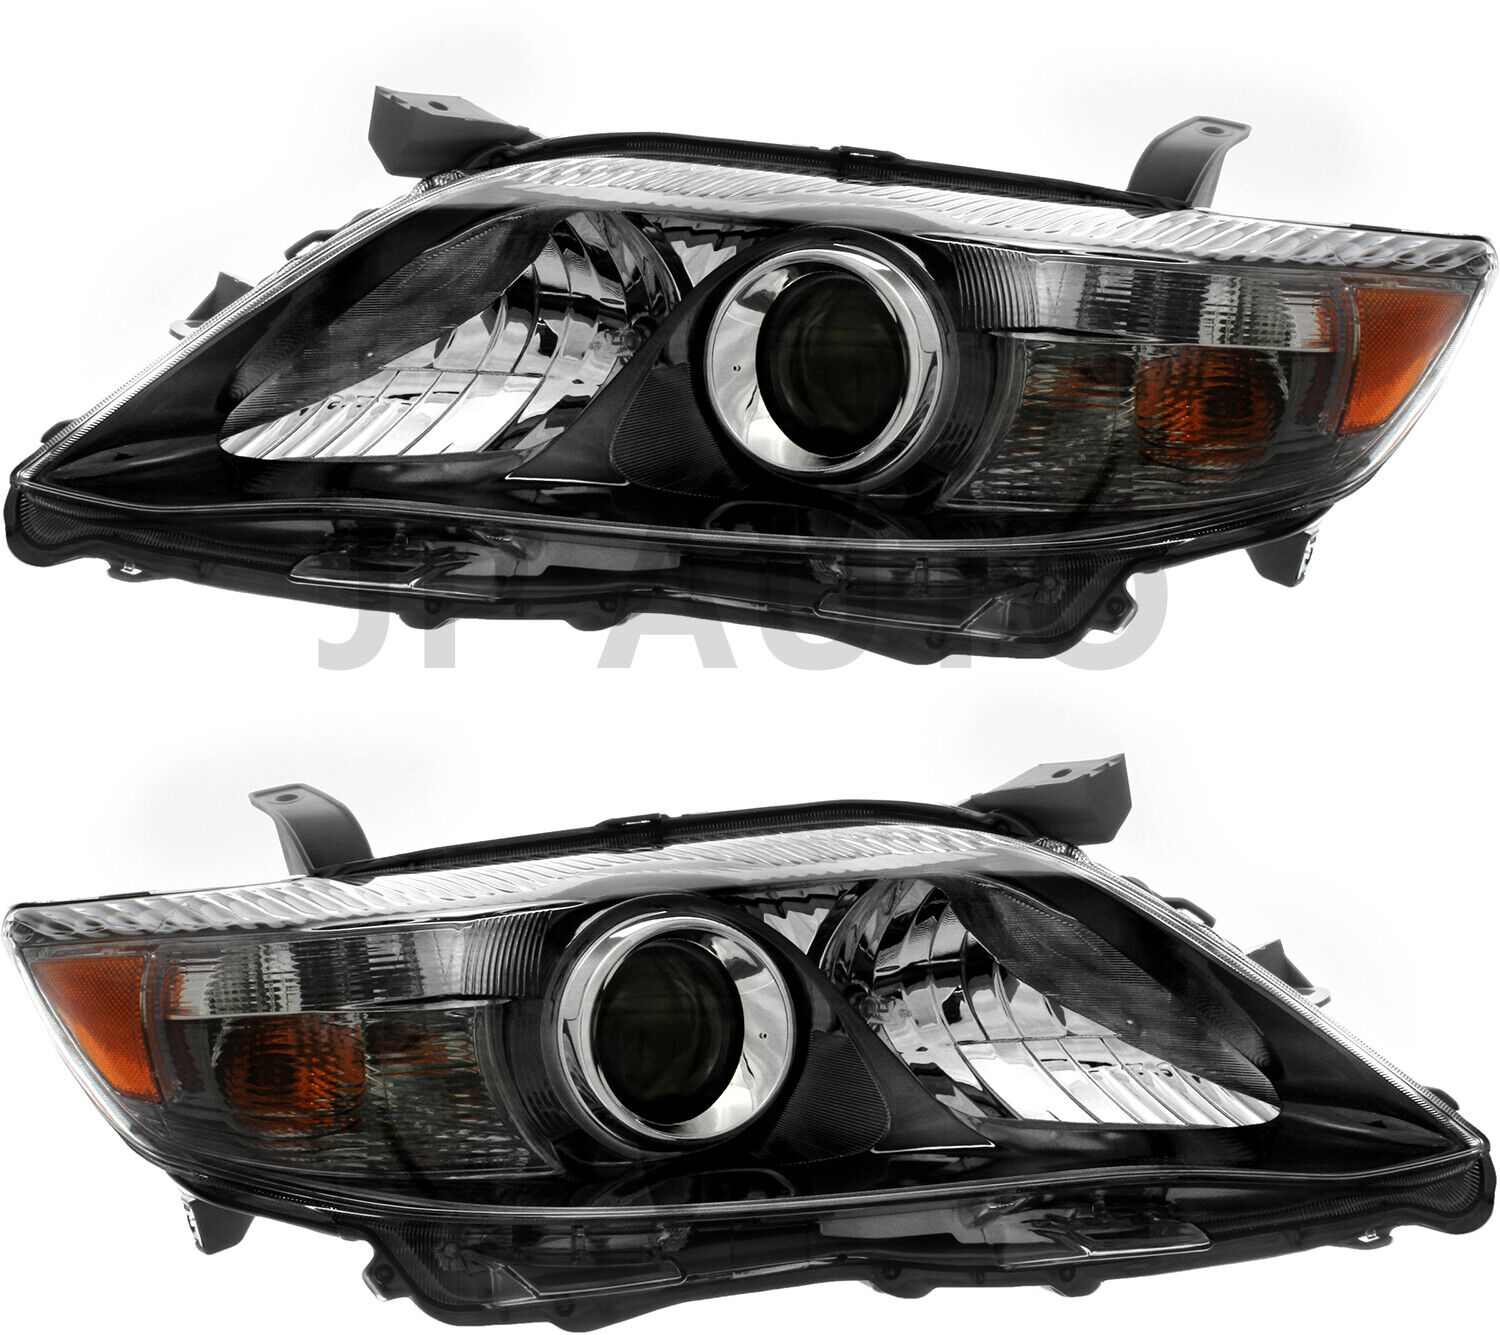 For 2010-2011 Toyota Camry Headlight Halogen Set Driver and Passenger Side